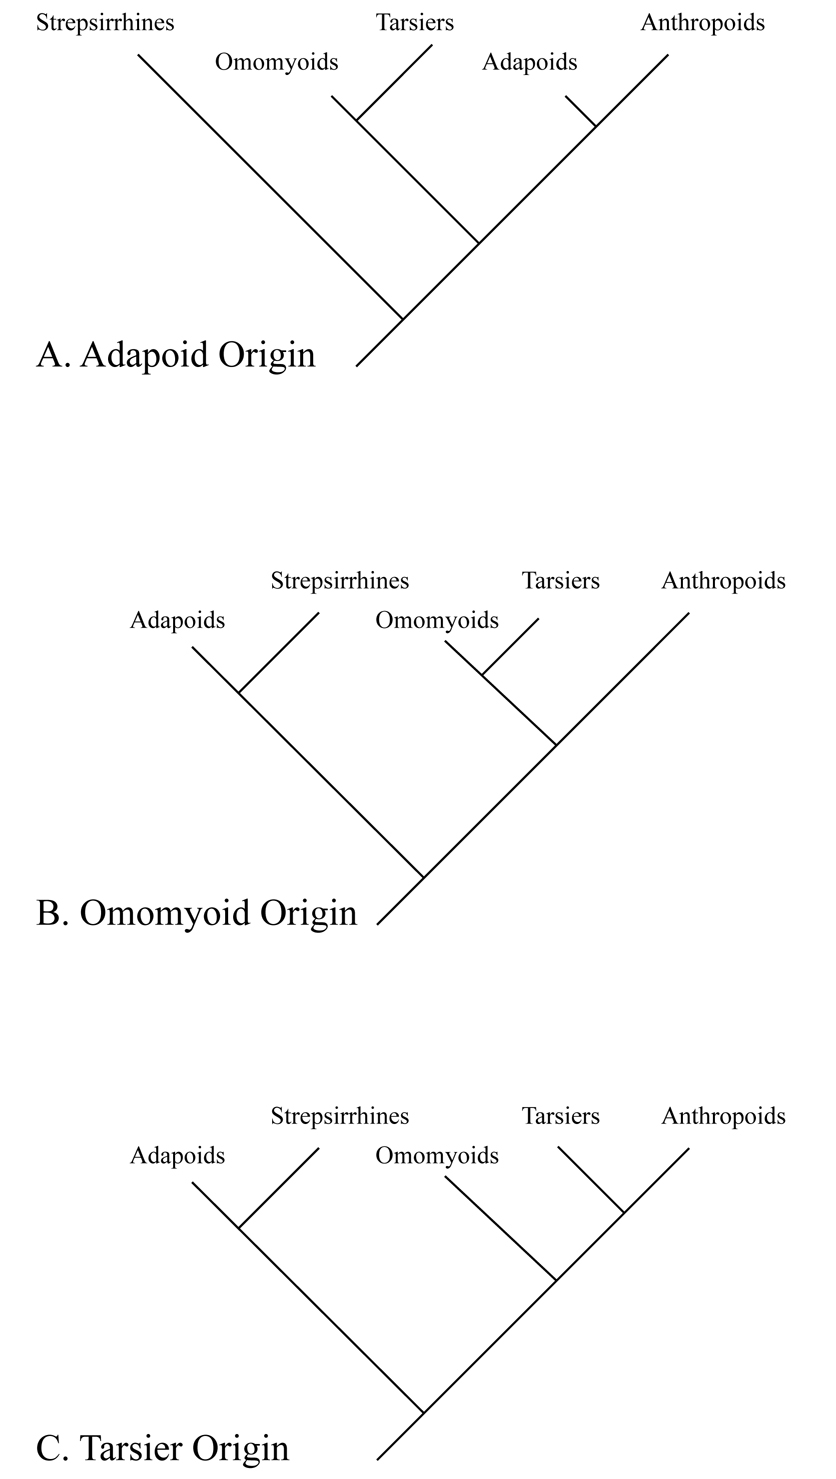 Illustration of competing trees for anthropoid origins.